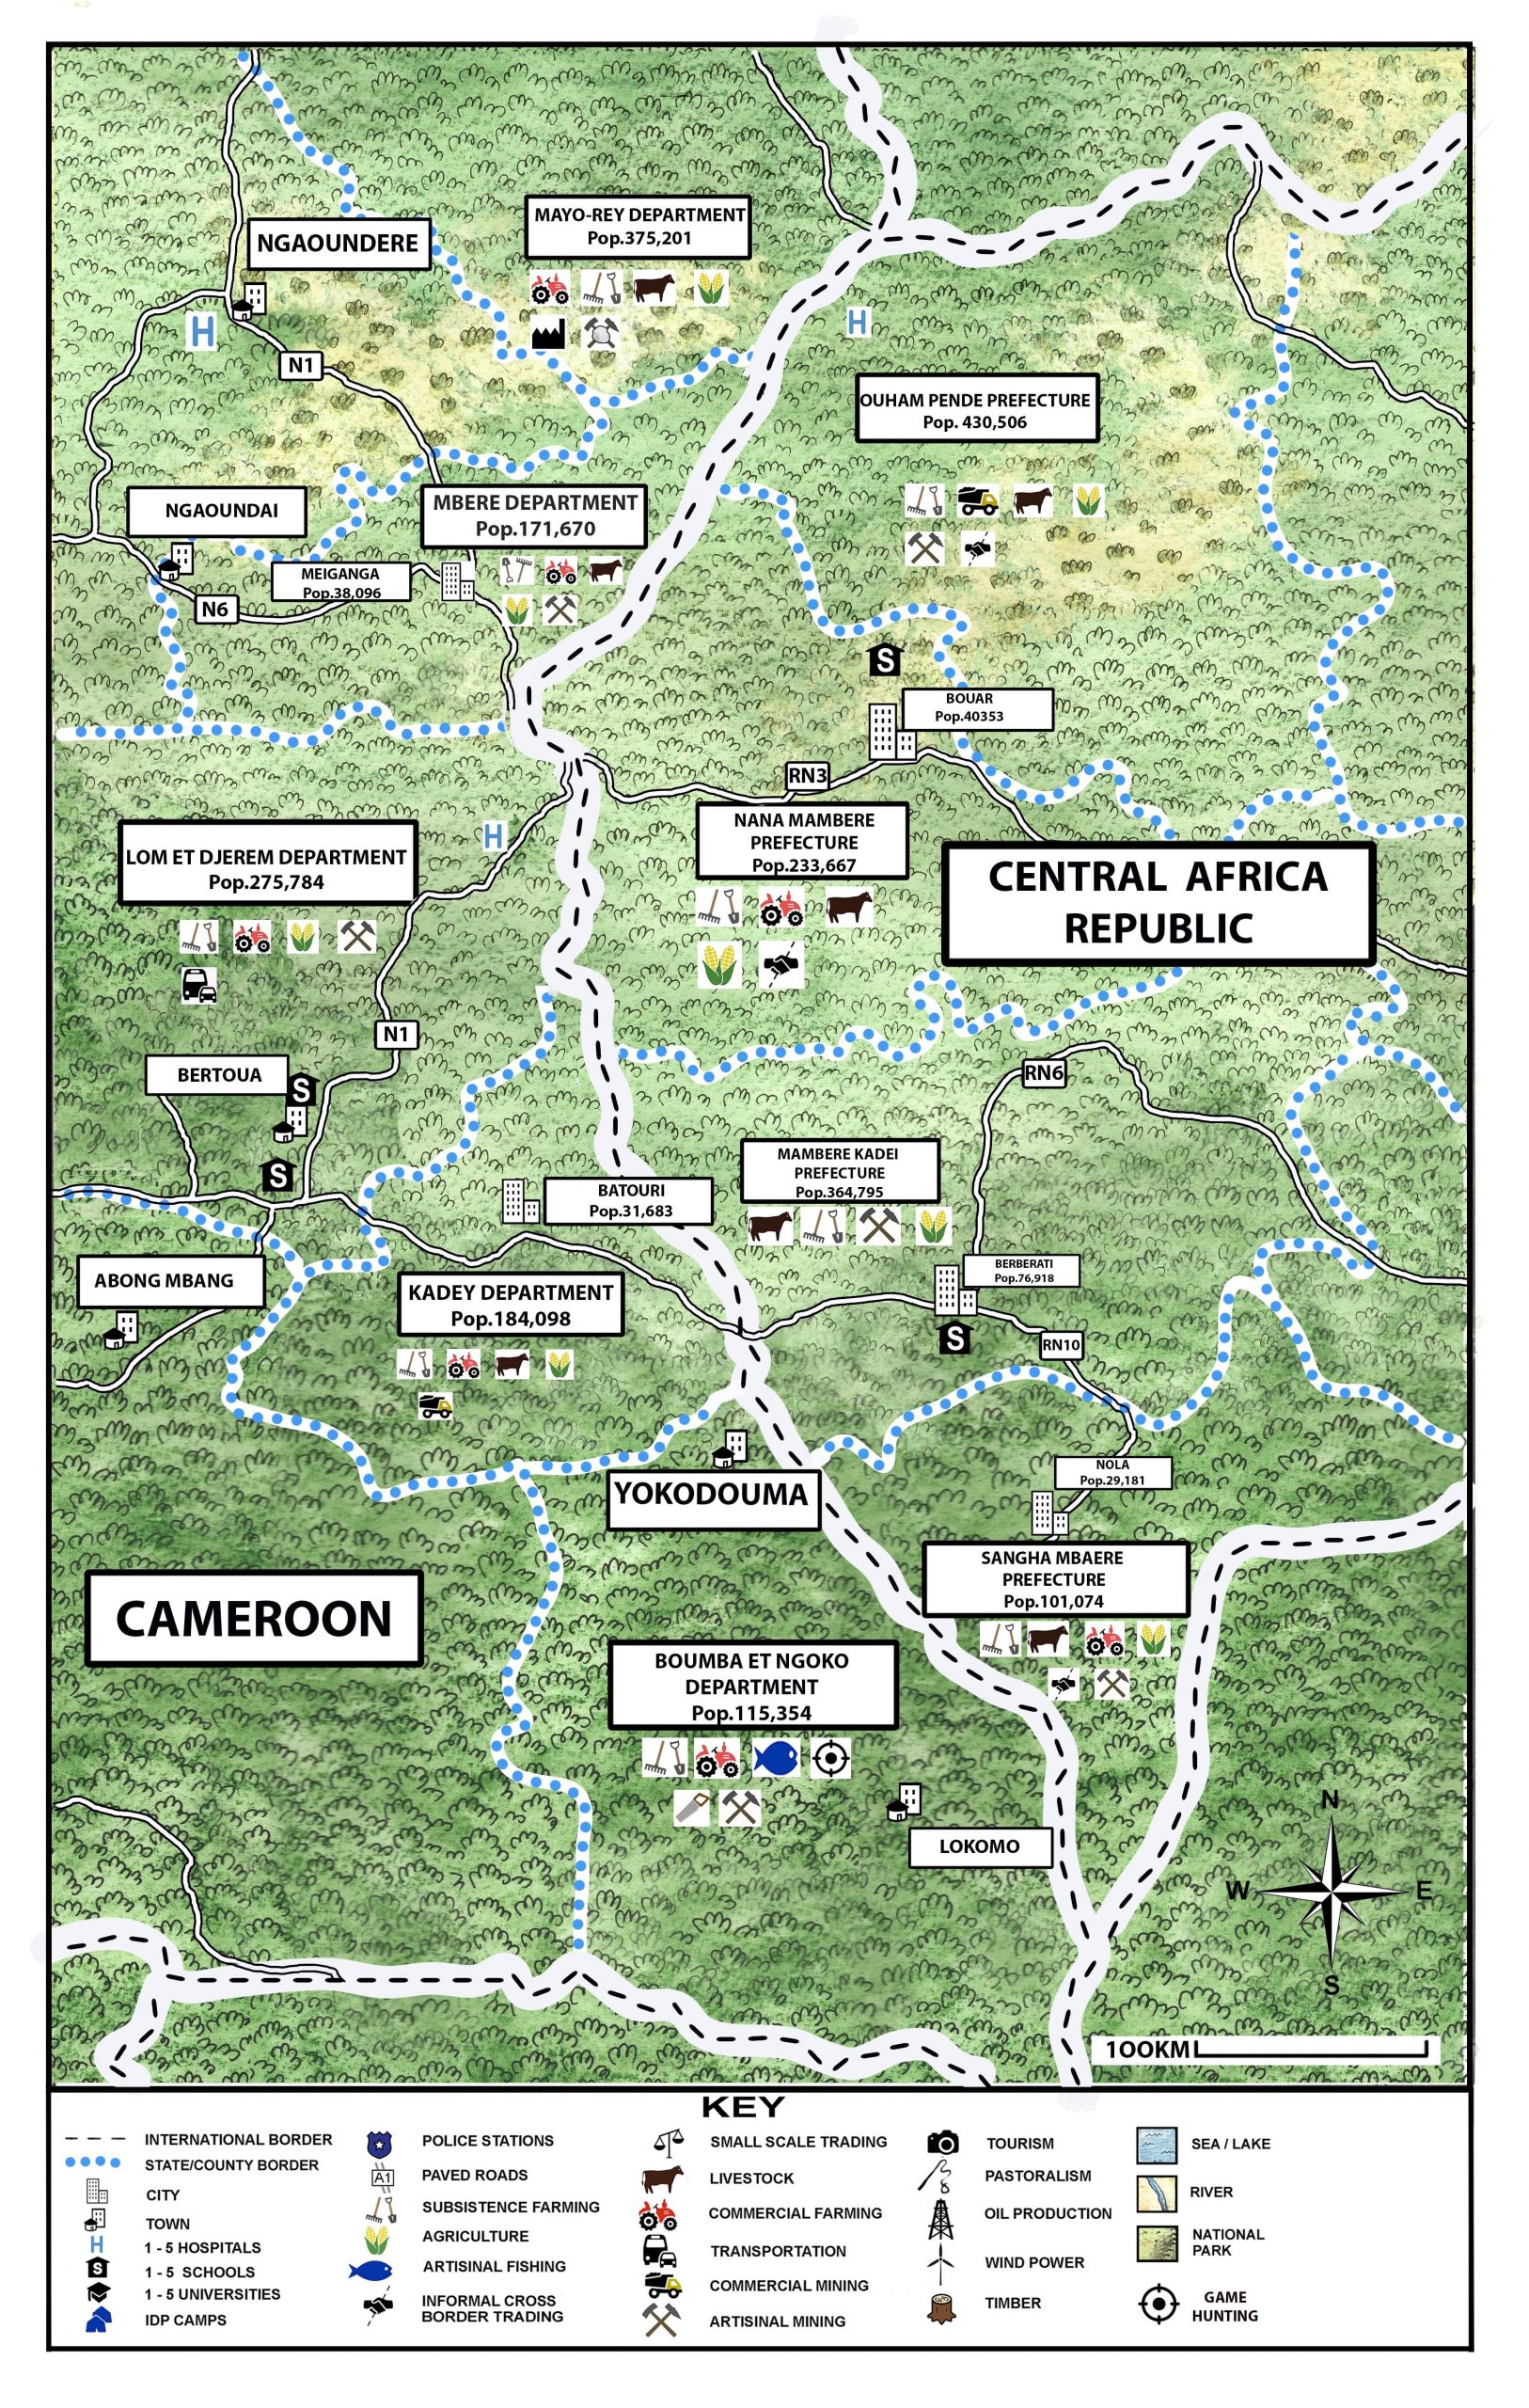 CAMEROON - CENTRAL AFRICAN REPUBLIC_illustration